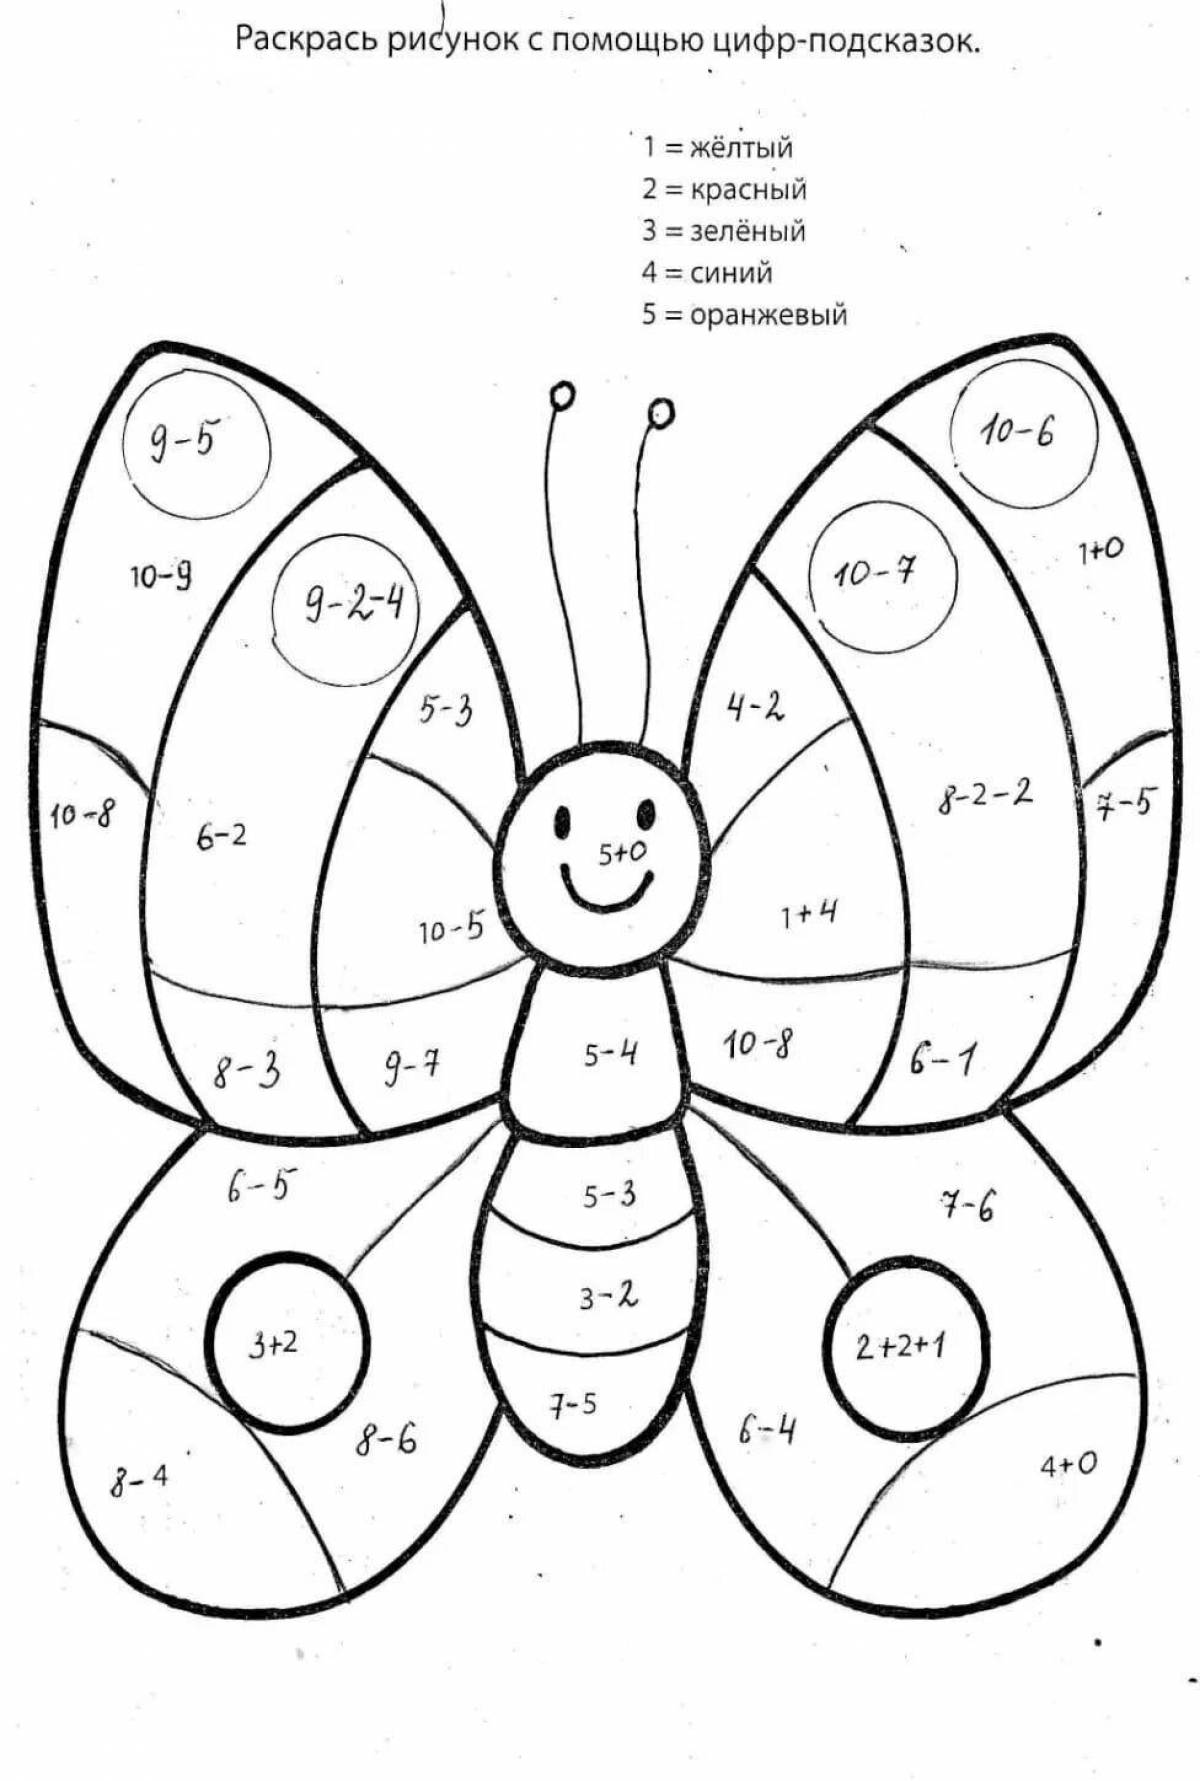 Colorful 1st class number coloring page